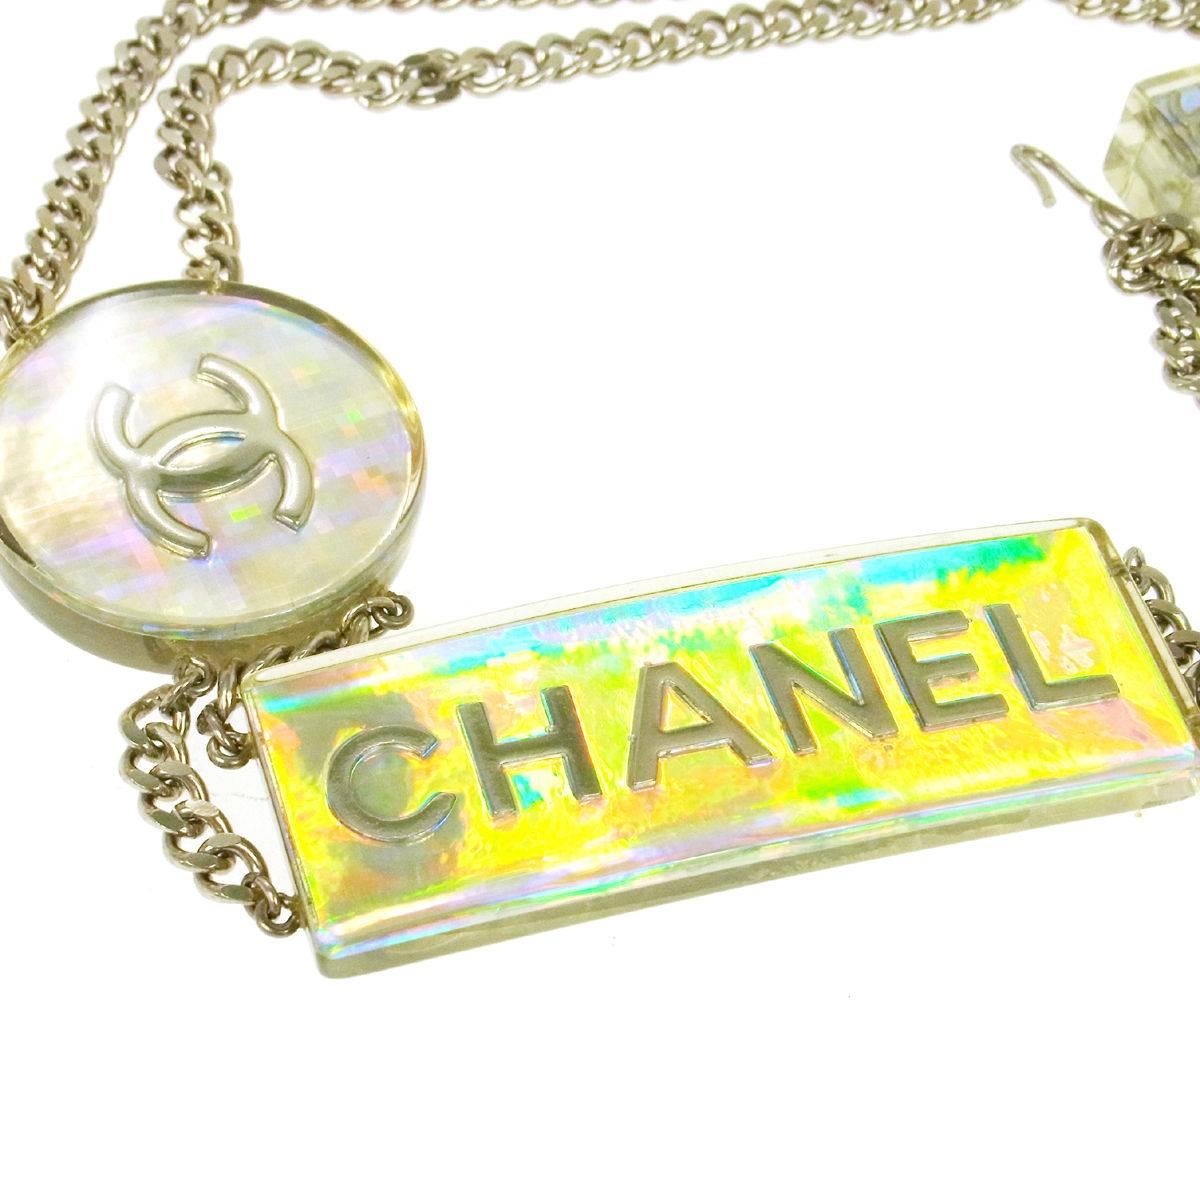 CURATOR'S NOTES

Sure to give any outfit a pop, this Chanel iridescent belt is a fun piece to add to your fashion repertoire.  Wear it as belt or necklace.  Your choice.

Metal
Silver tone
Iridescent accent
Hook closure
Made in France
CC